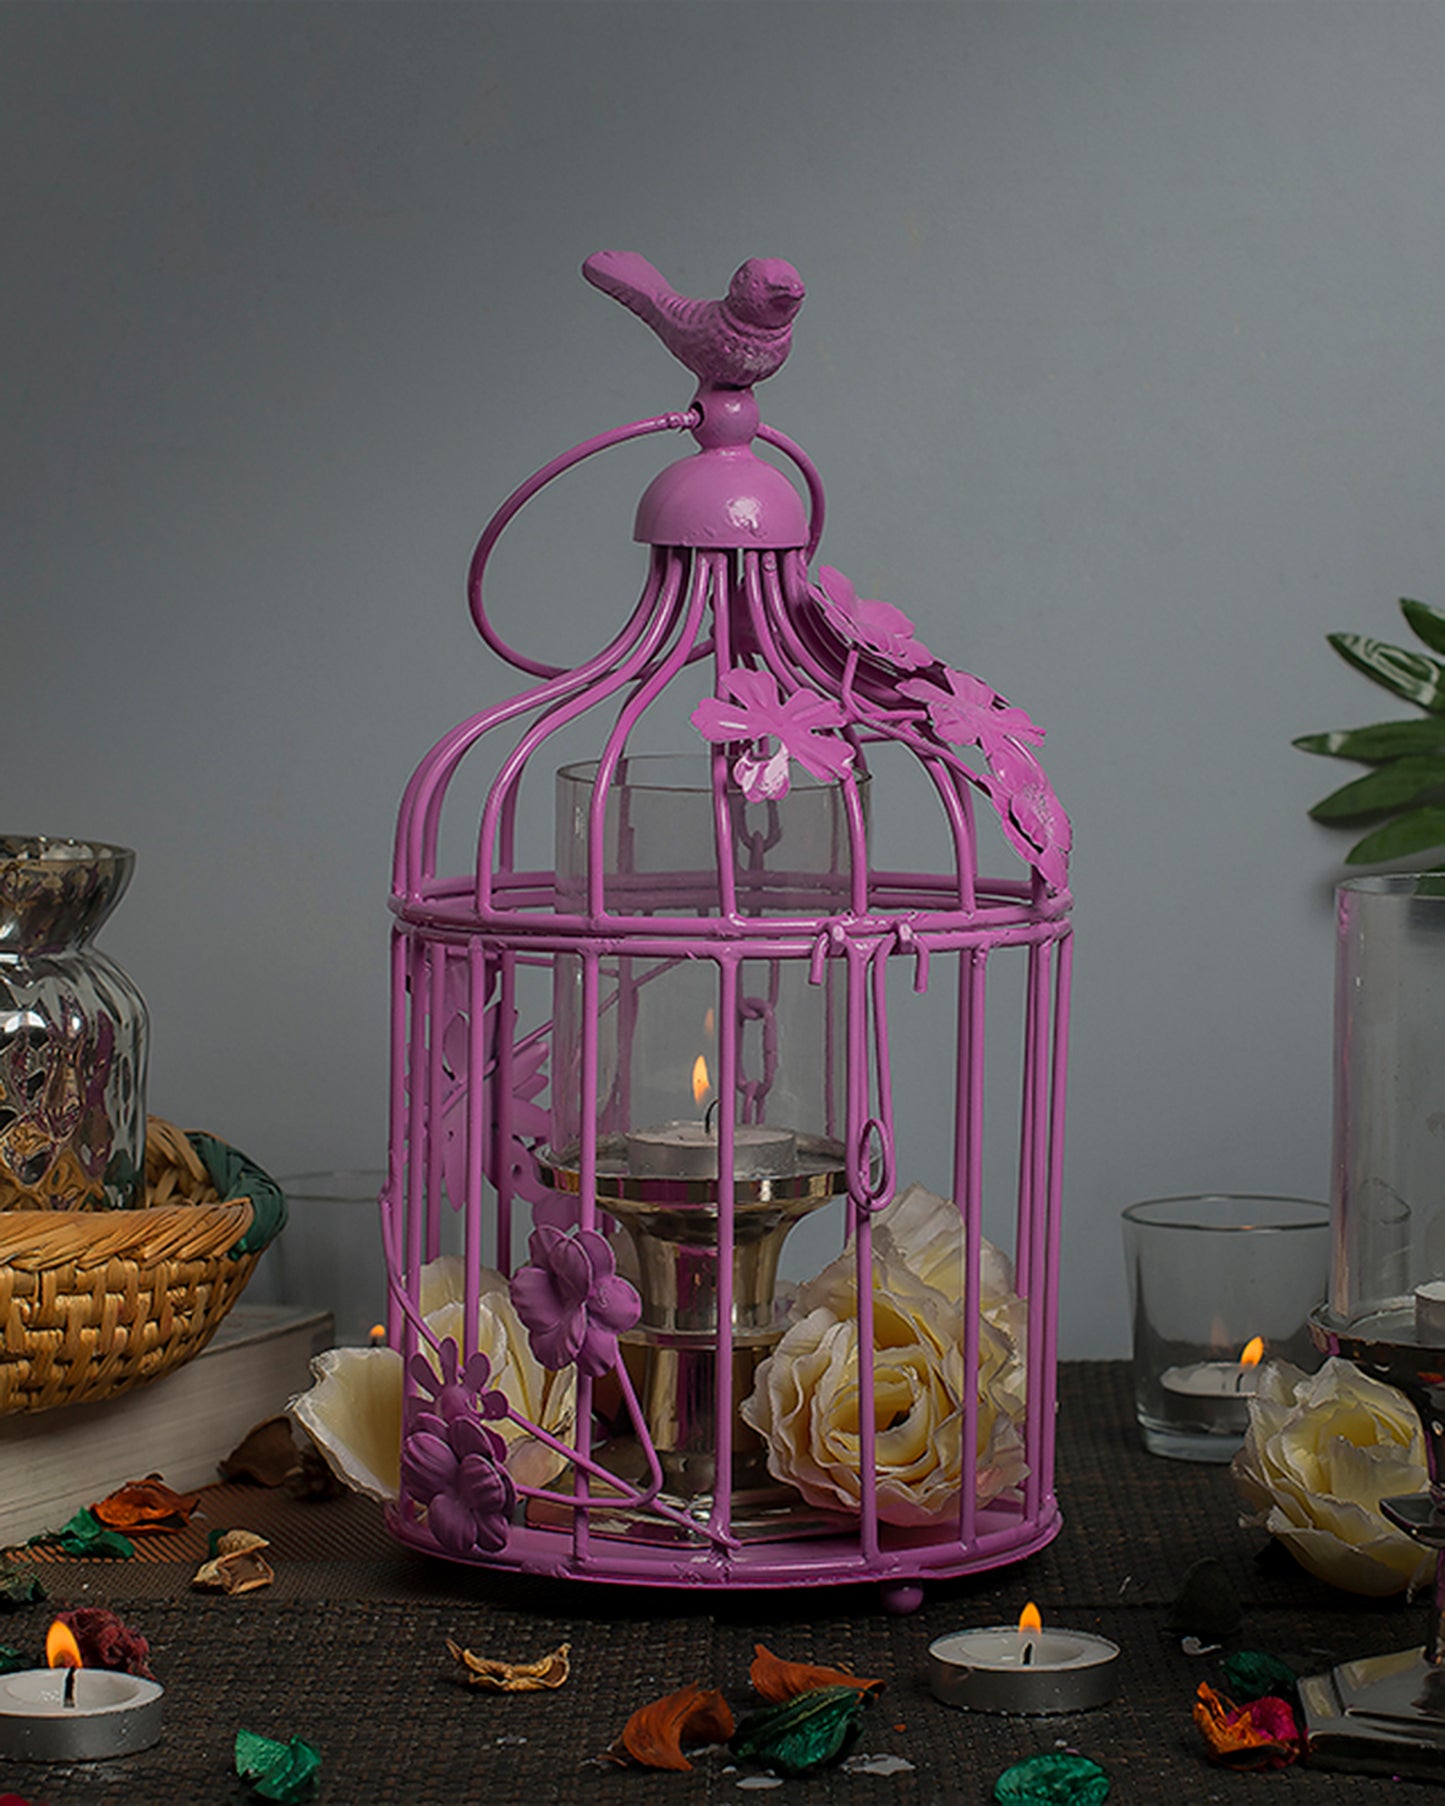 Bird Cage with Floral Vine Small Single, with hanging chain